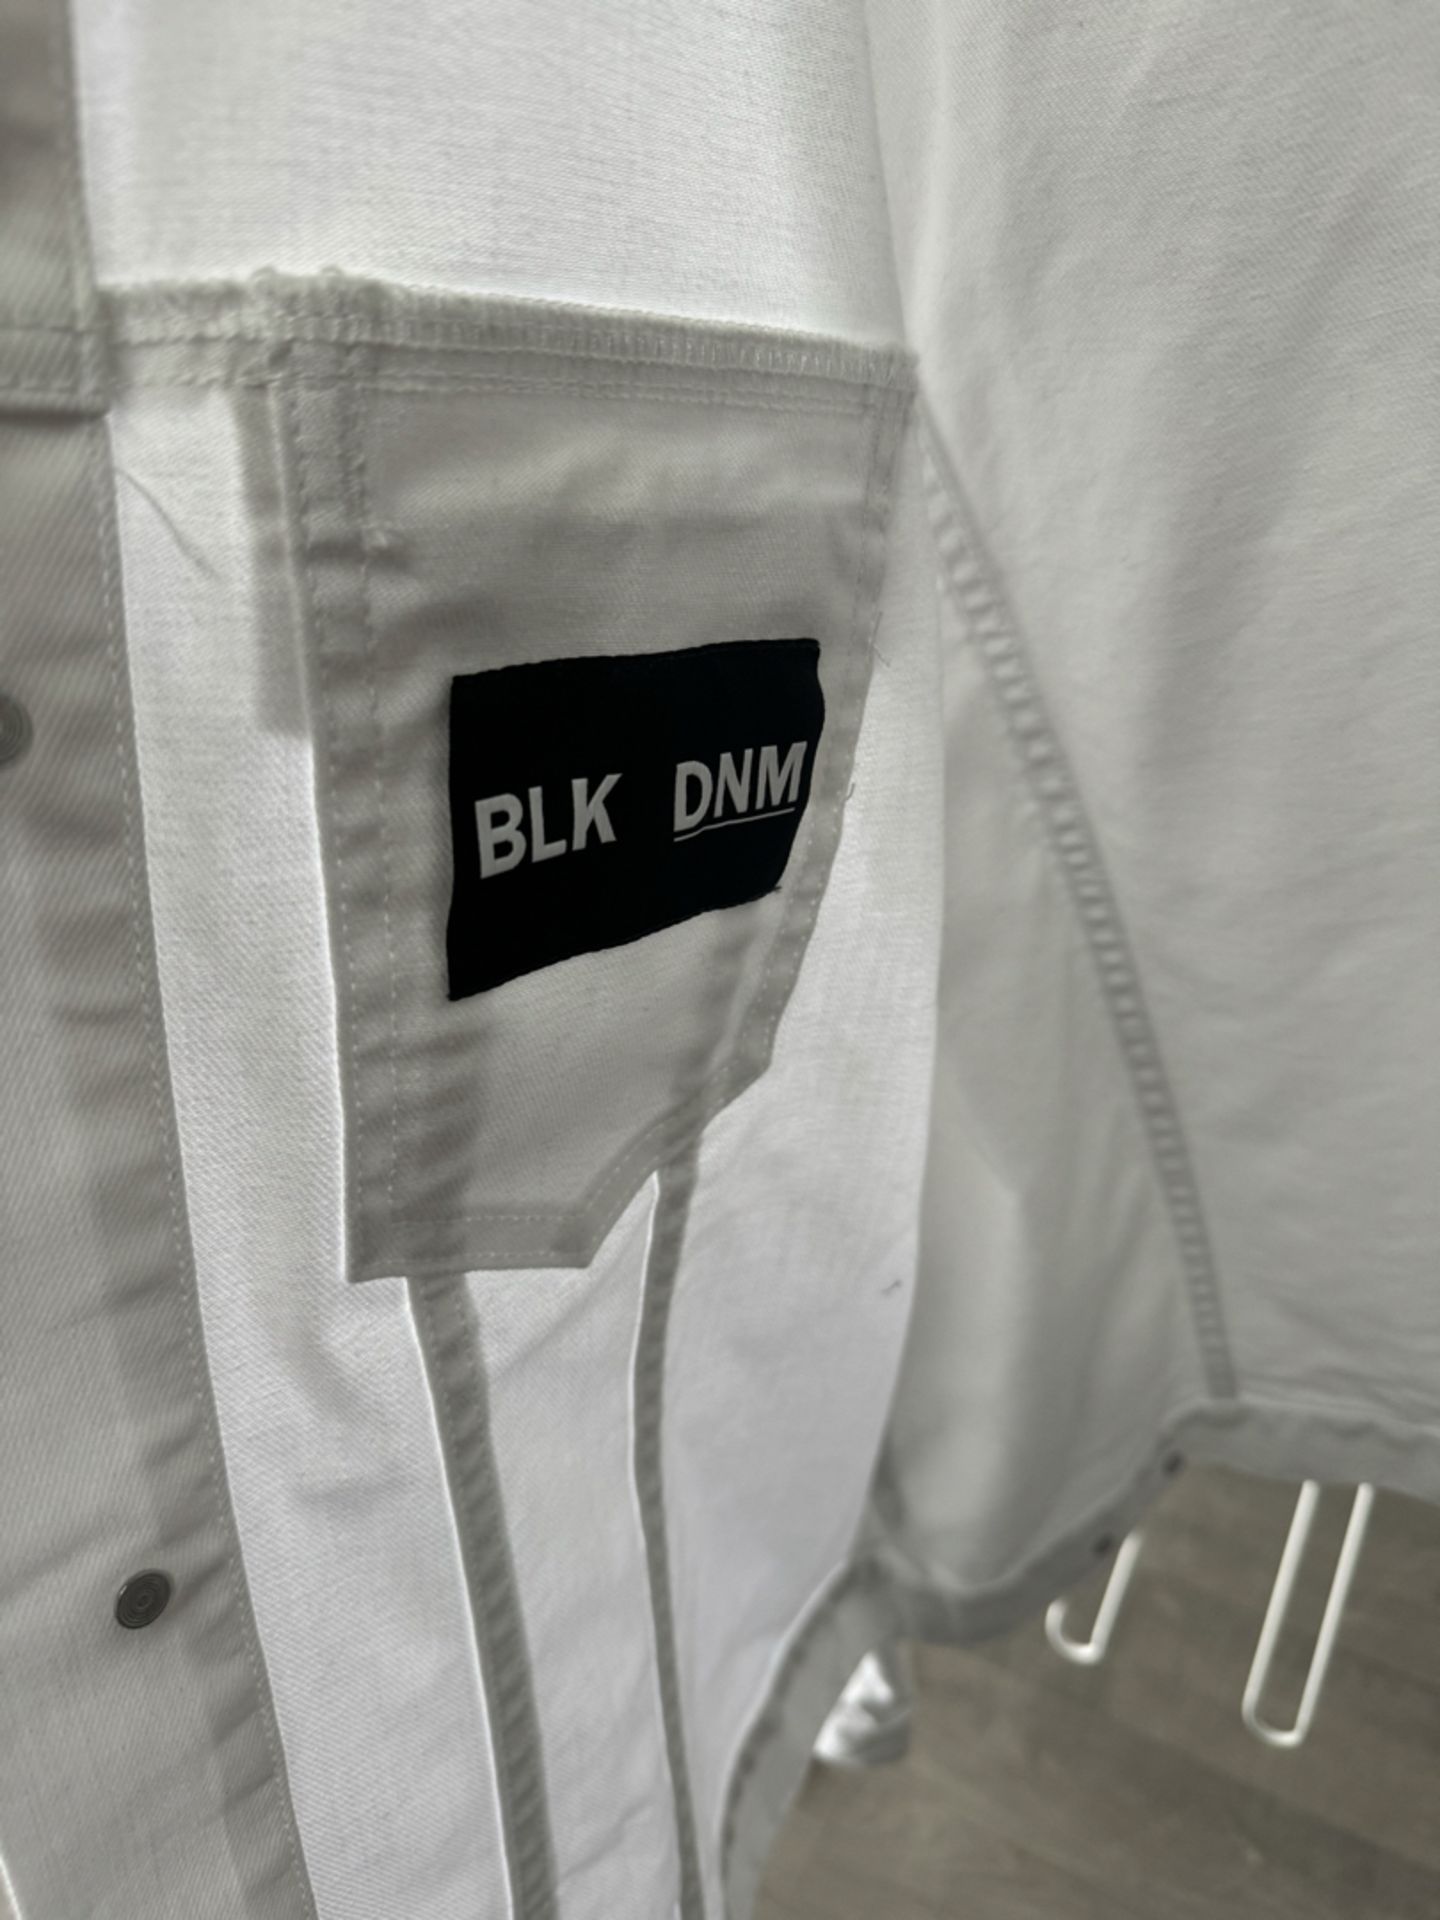 BLK DNM NYC Unisex White Jacket - New with Tags - Size XL - RRP Â£150+ - NO VAT! - Image 4 of 7